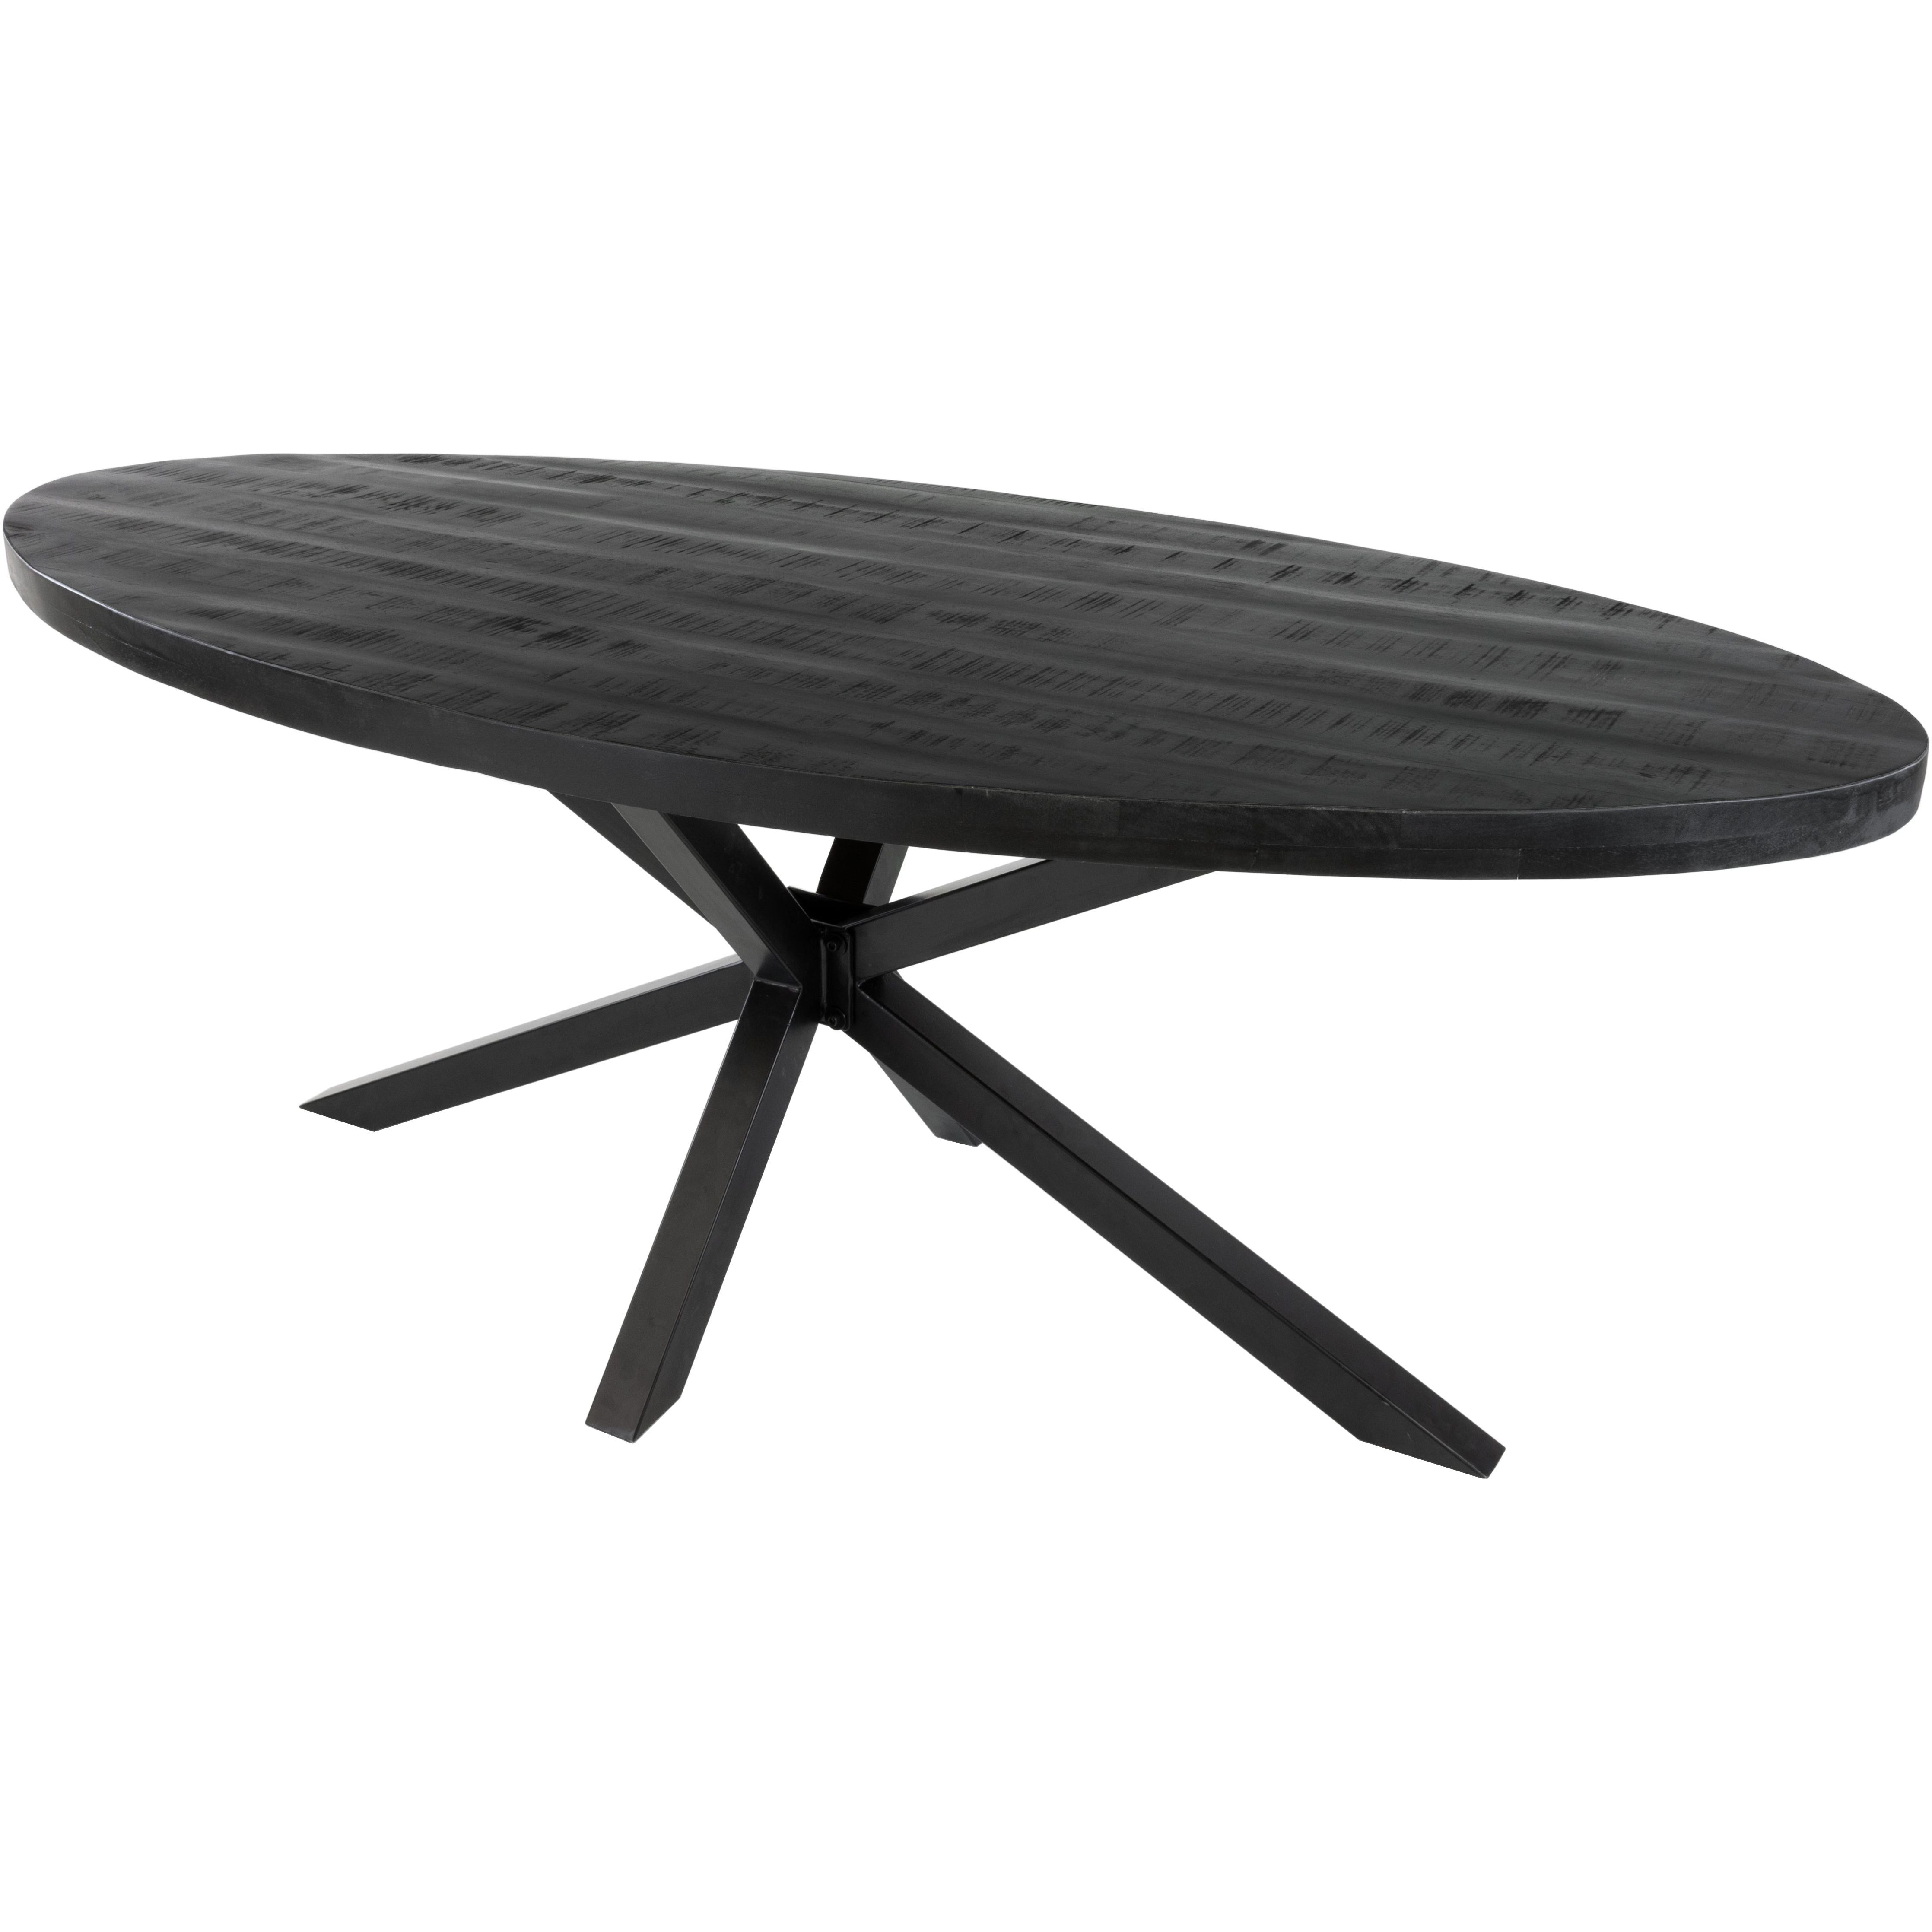 Kick dining table Dax oval - 180cm